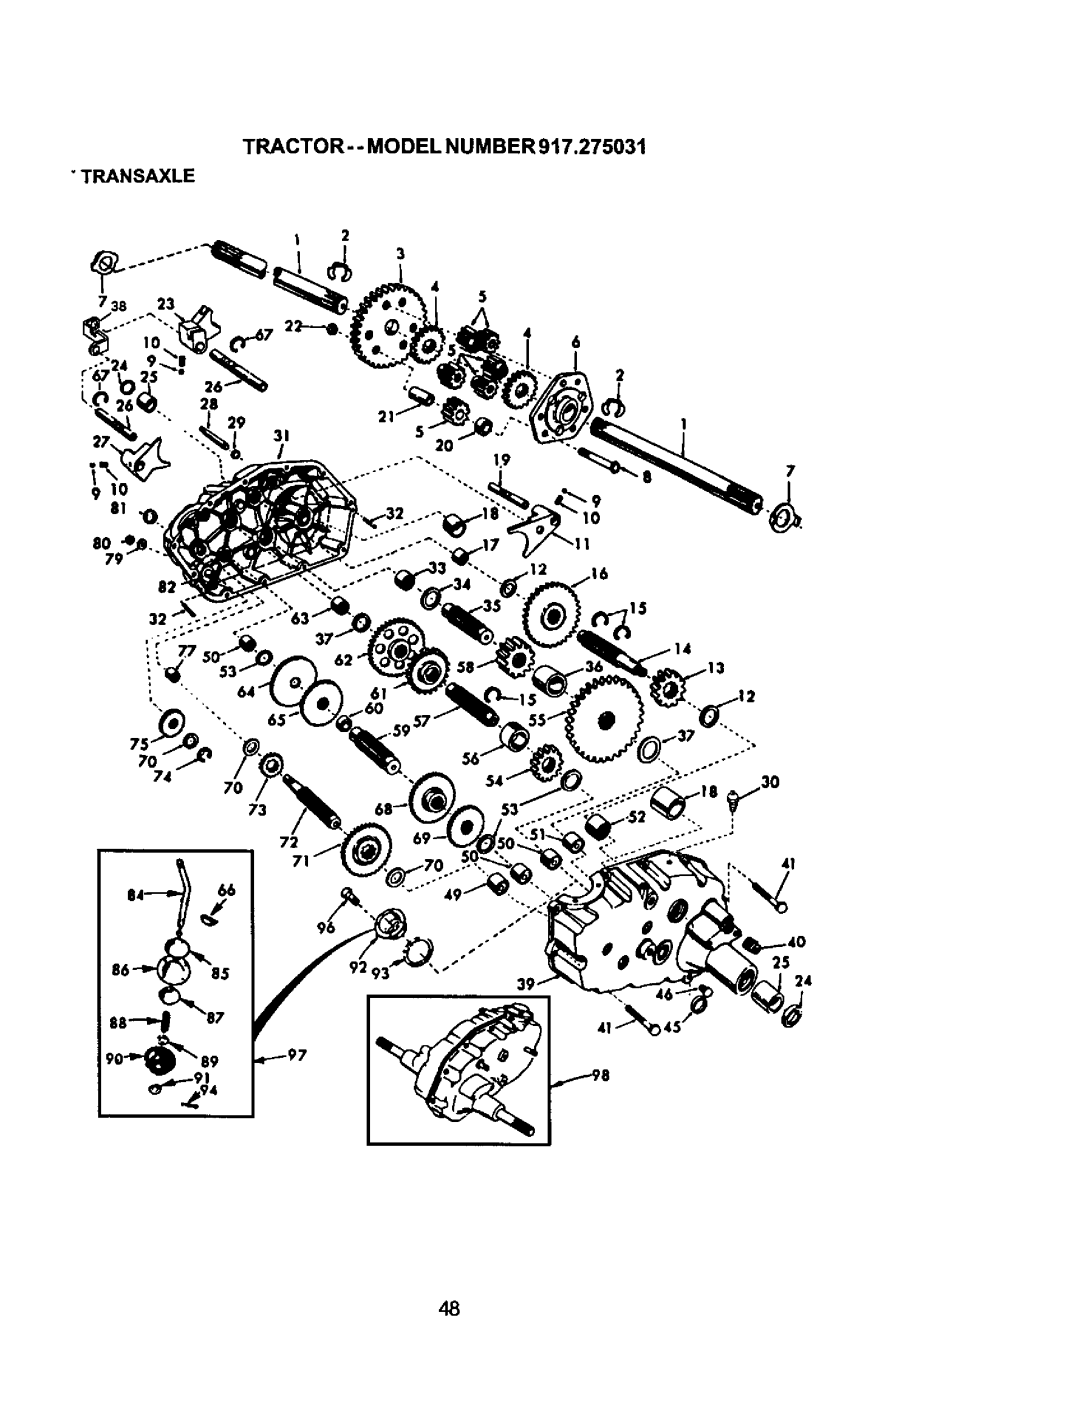 Craftsman 917.275031 owner manual Tractor- - Model Number, Transaxle, 7 4t 25 24, 74 70 